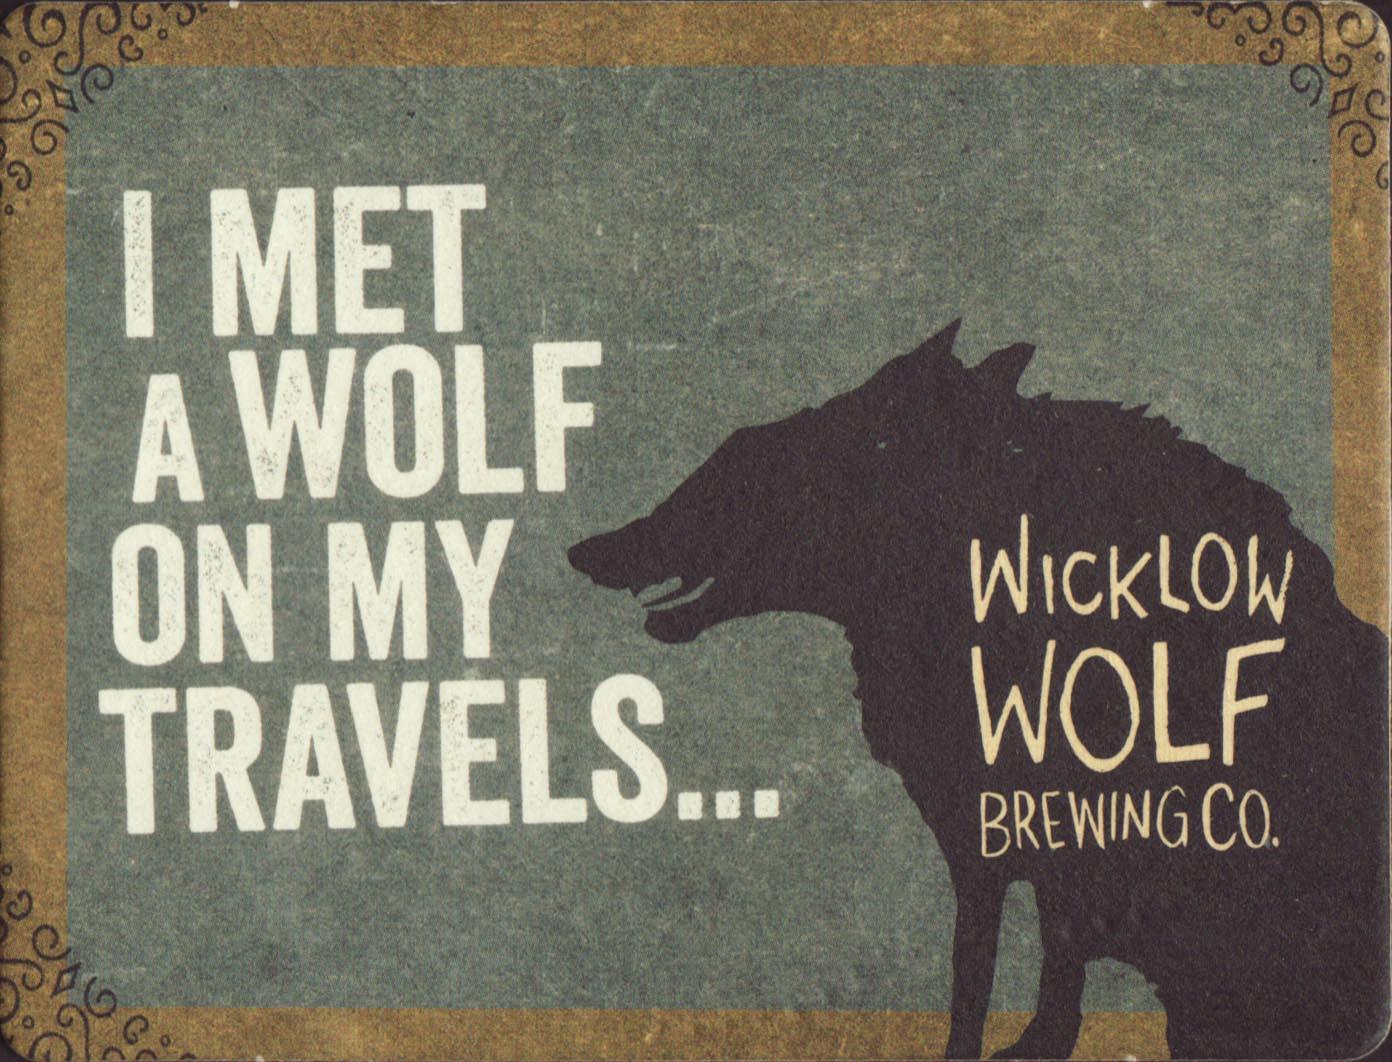 Beer Mat Wicklow Wolf Brewing Co Ireland Postcard and Beer Coaster 